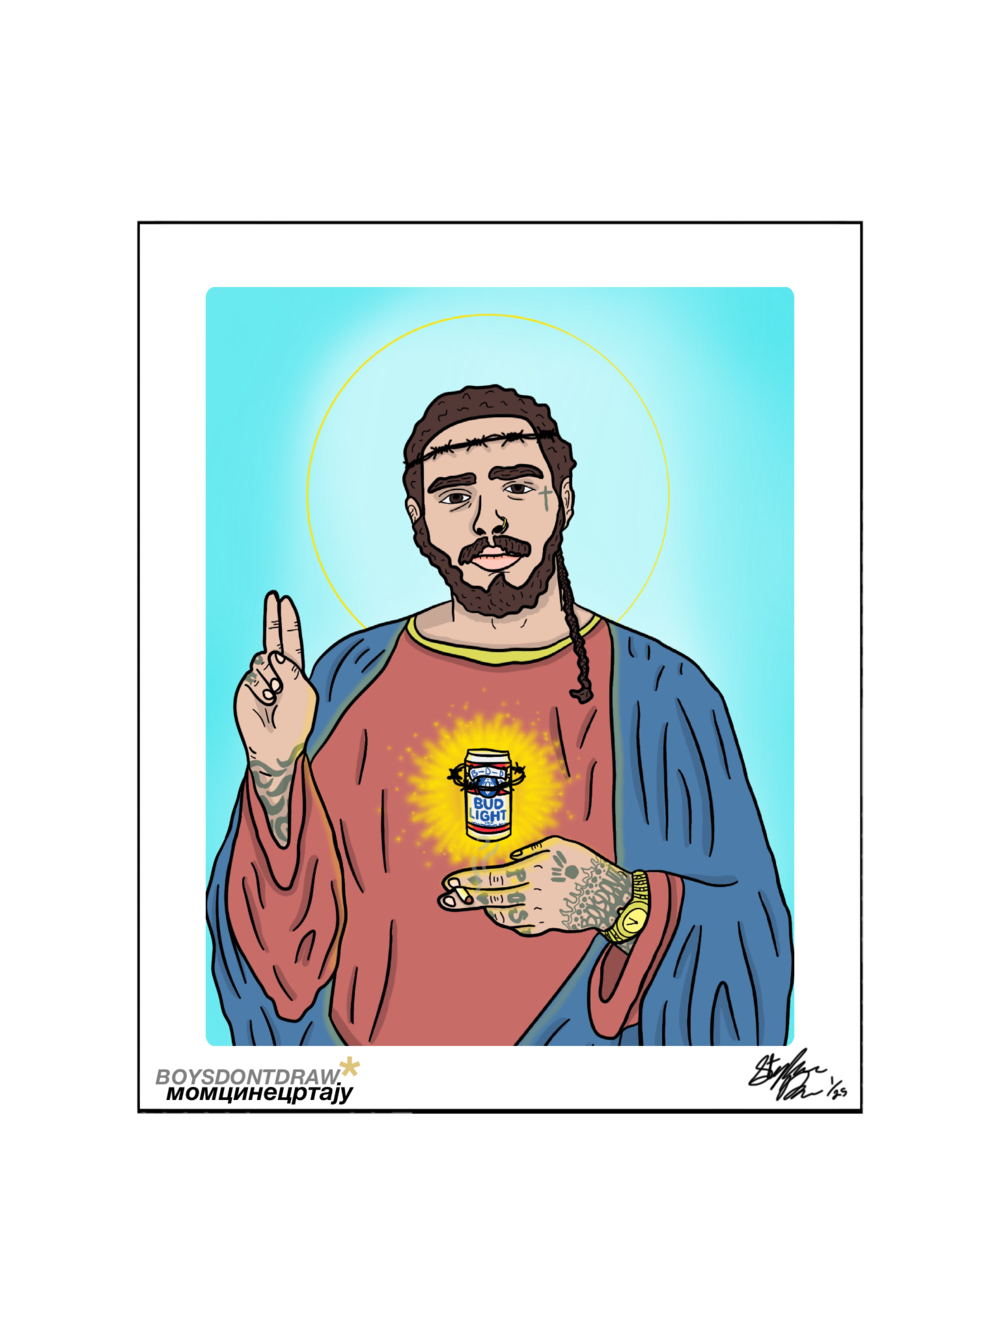 POST MALONE - THE HOLY POST - Limited Print by BOYSDONTDRAW